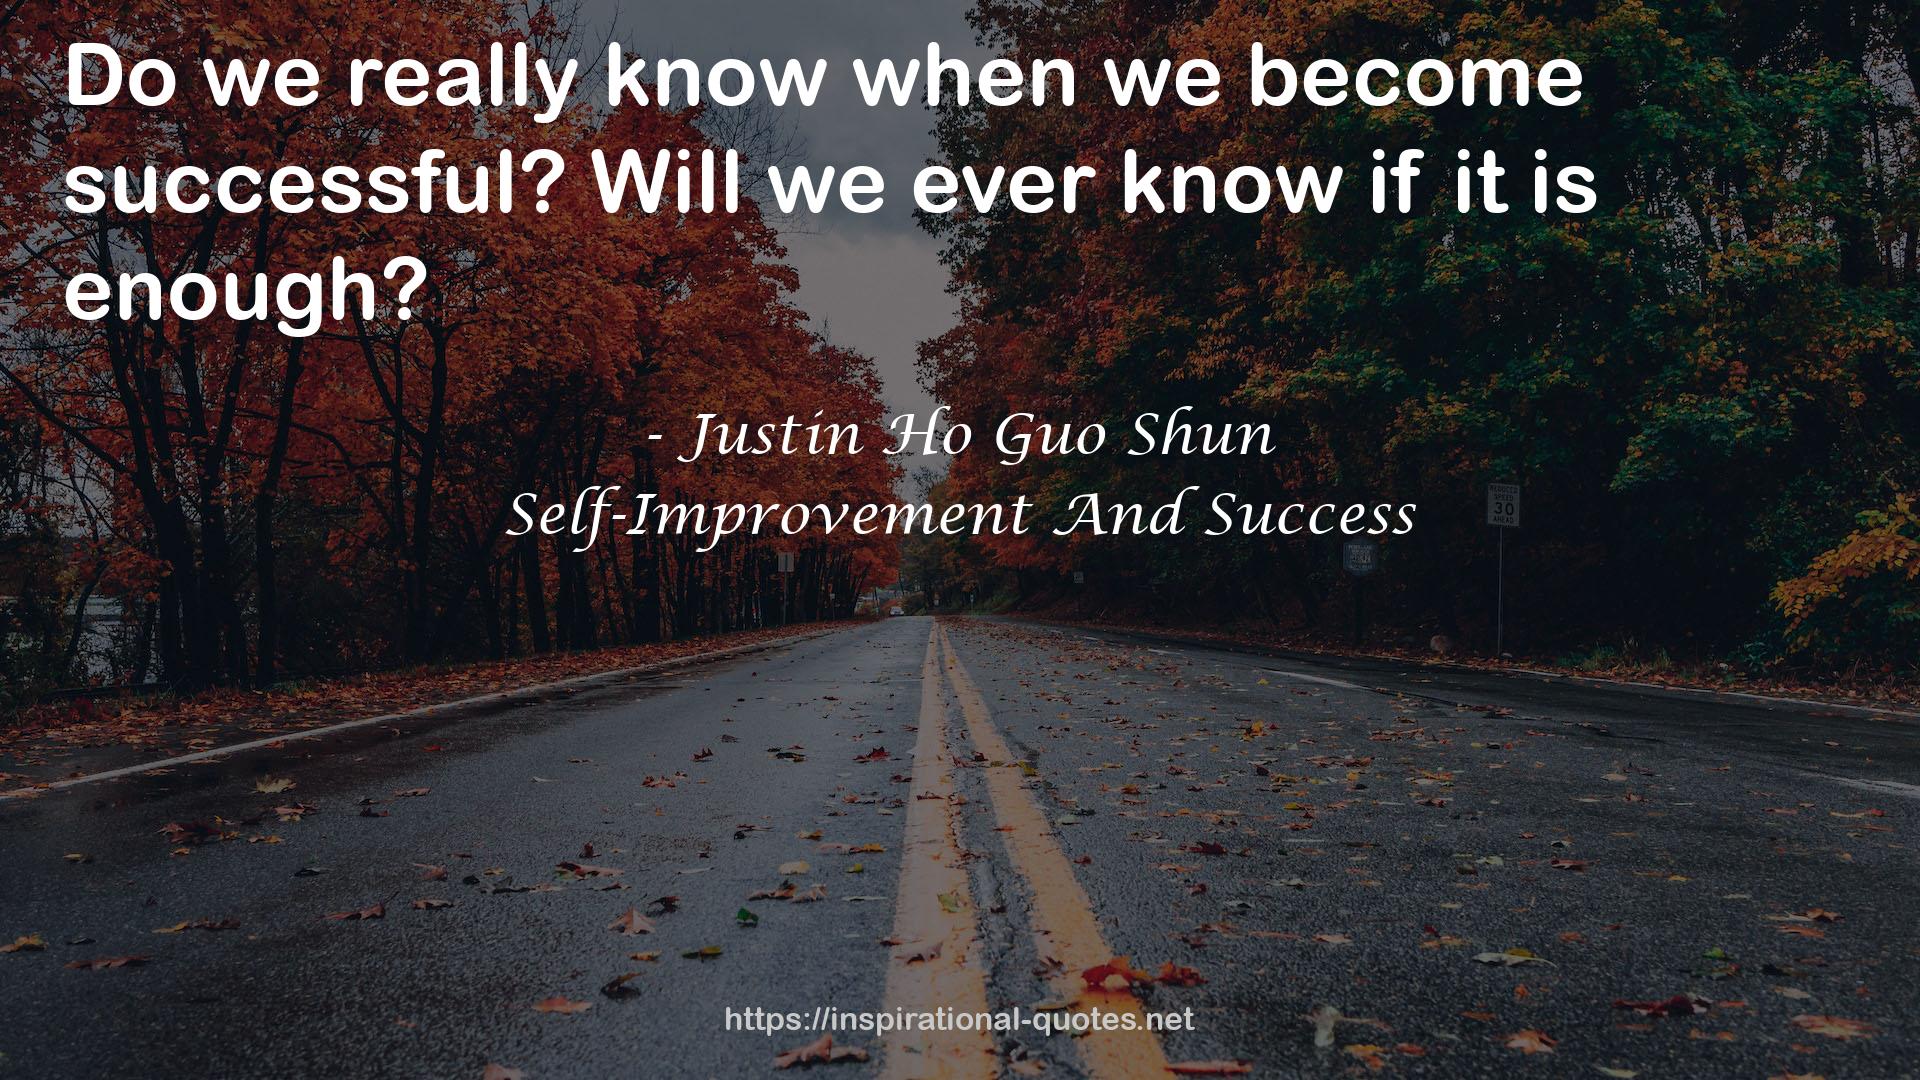 Self-Improvement And Success QUOTES